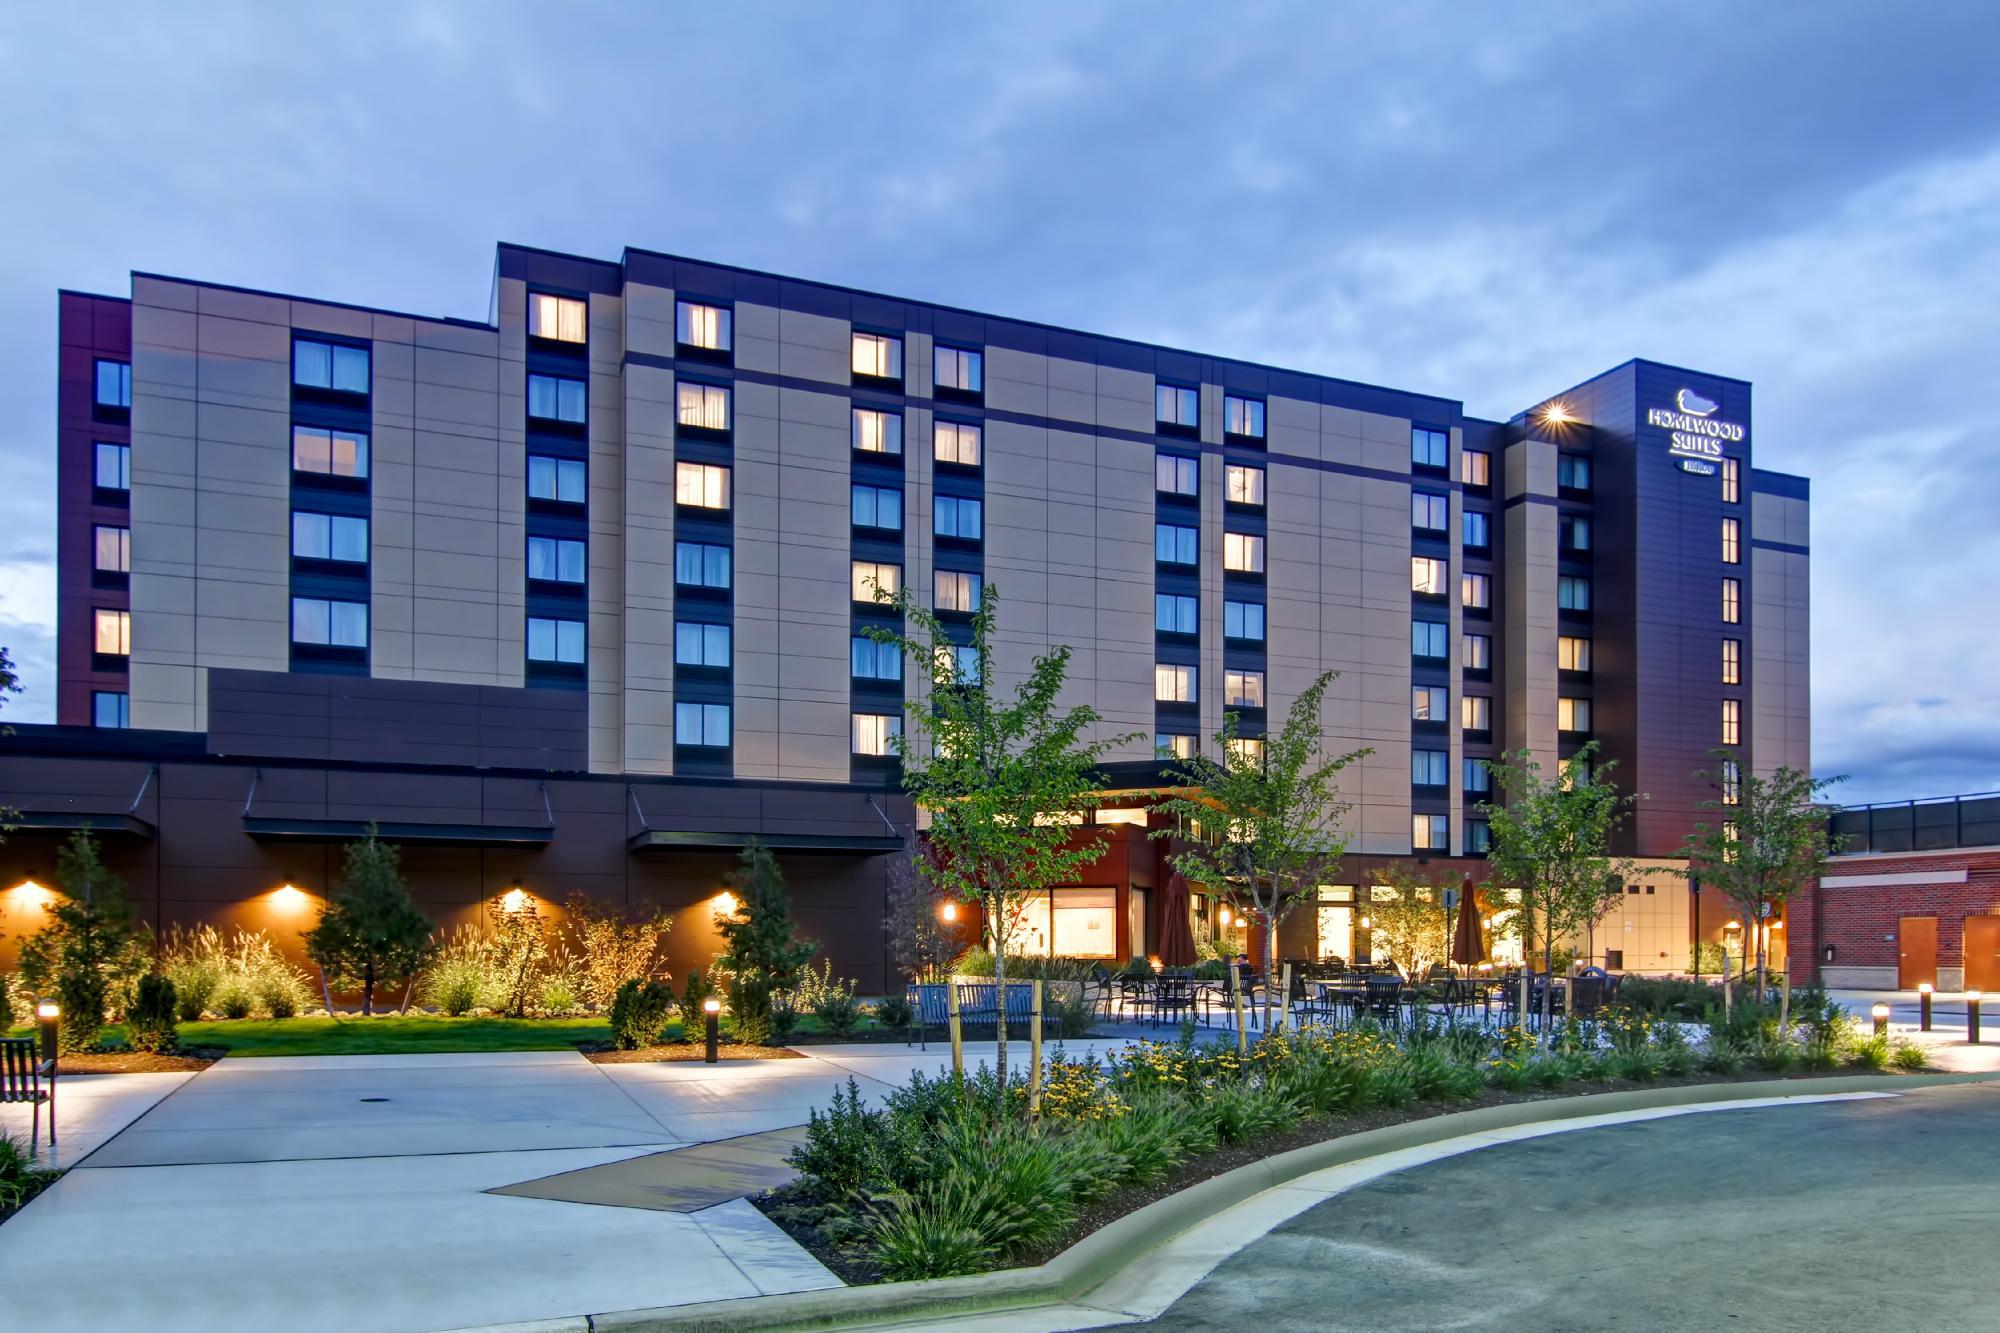 Photo of Homewood Suites by Hilton Seattle-Issaquah, Issaquah, WA